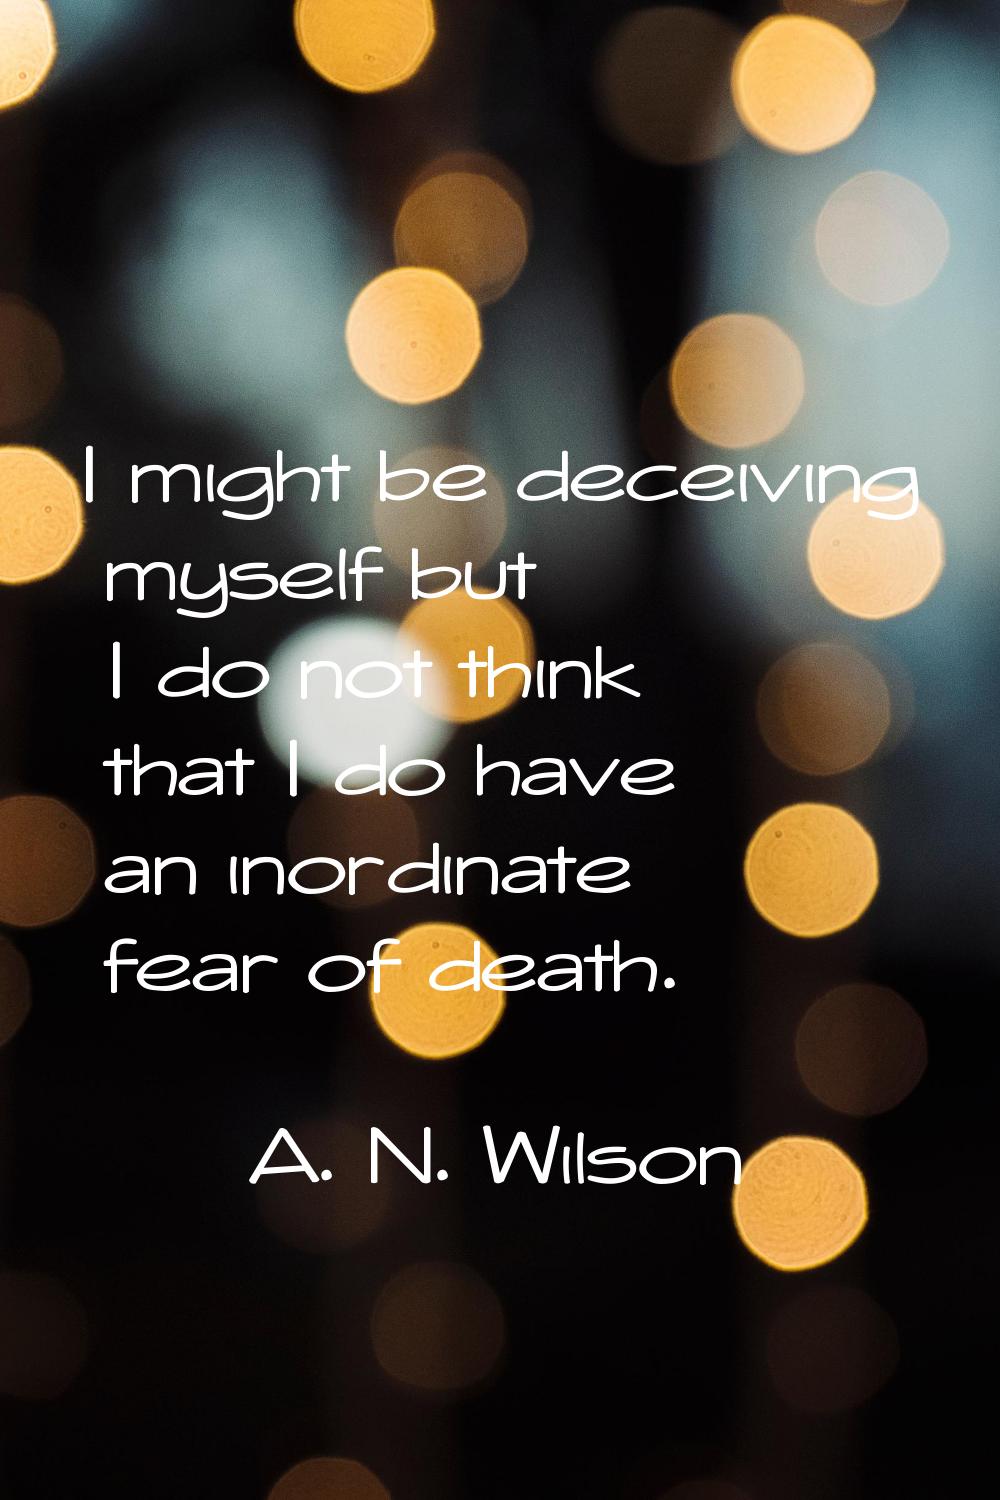 I might be deceiving myself but I do not think that I do have an inordinate fear of death.